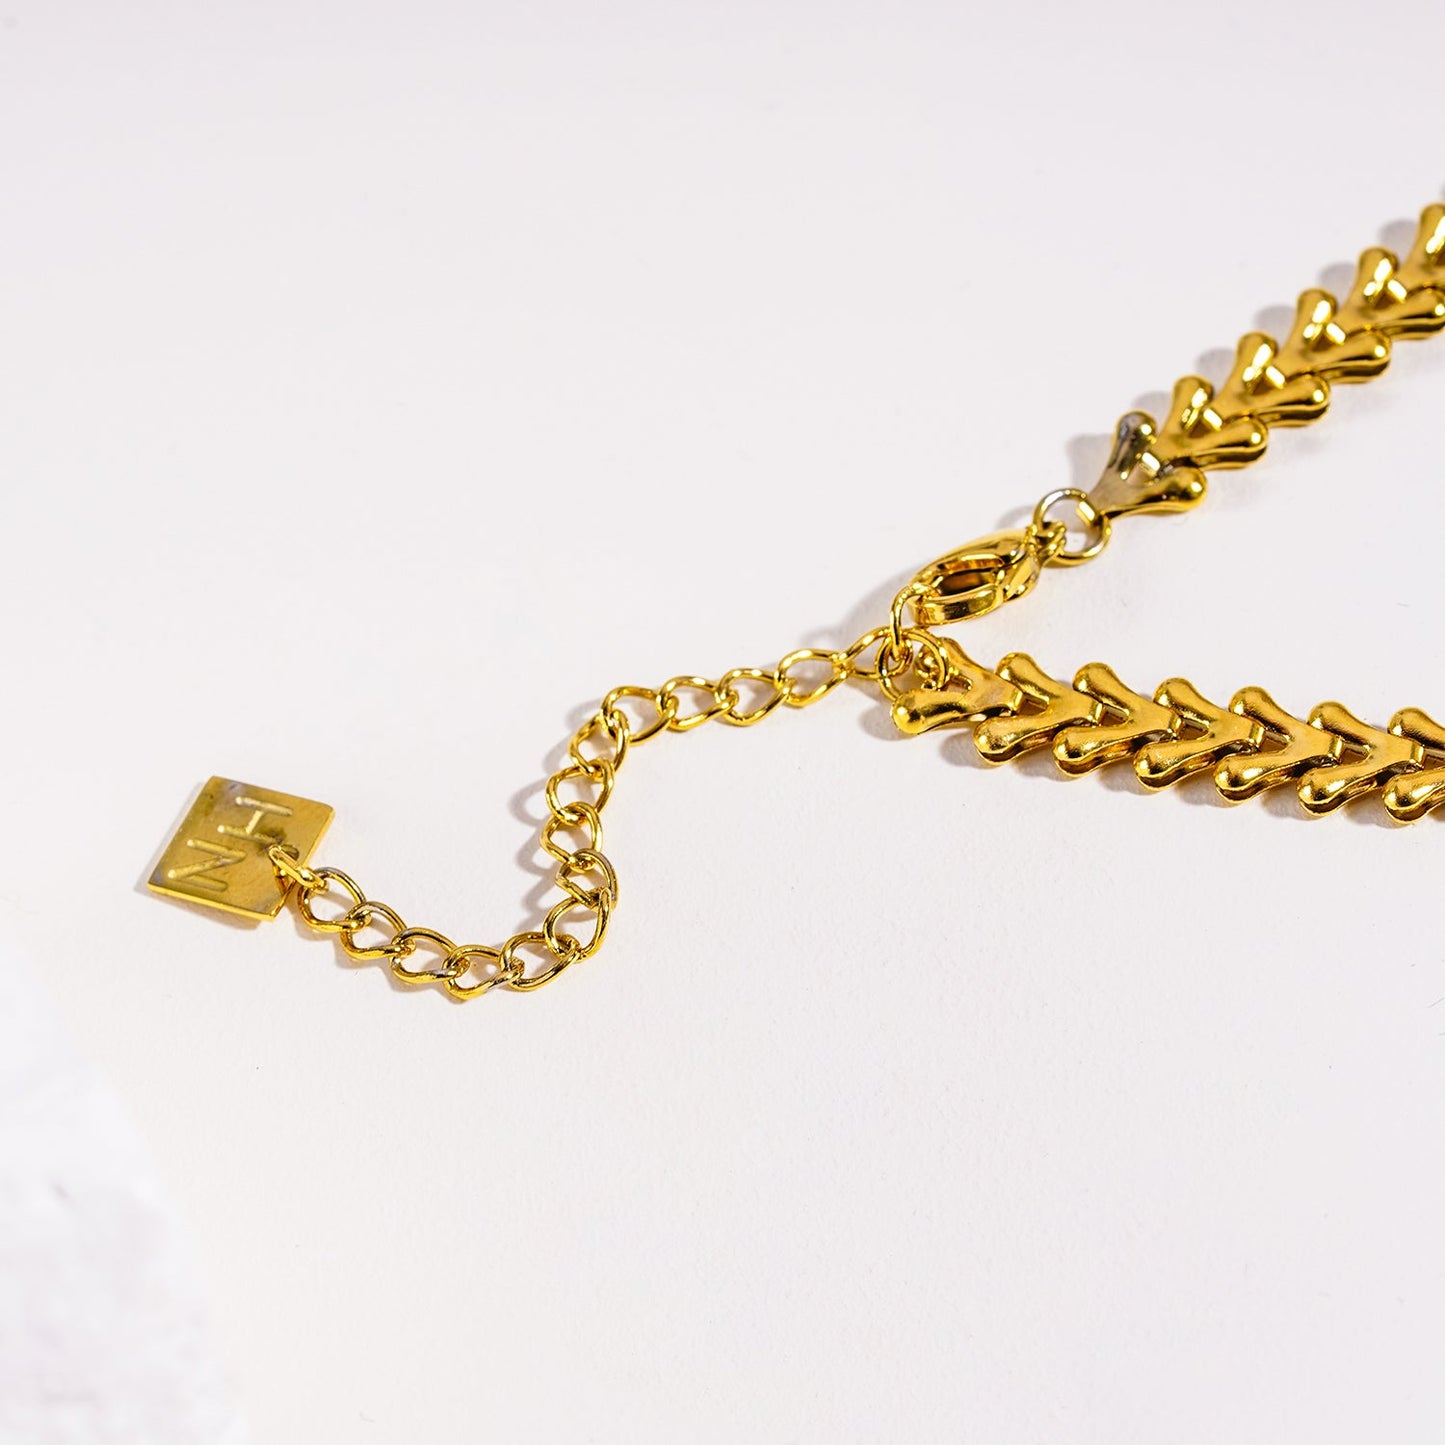 Style FRANKIE 8696:  Vintage-Inspired Linked Abstract Crest Chain Necklace